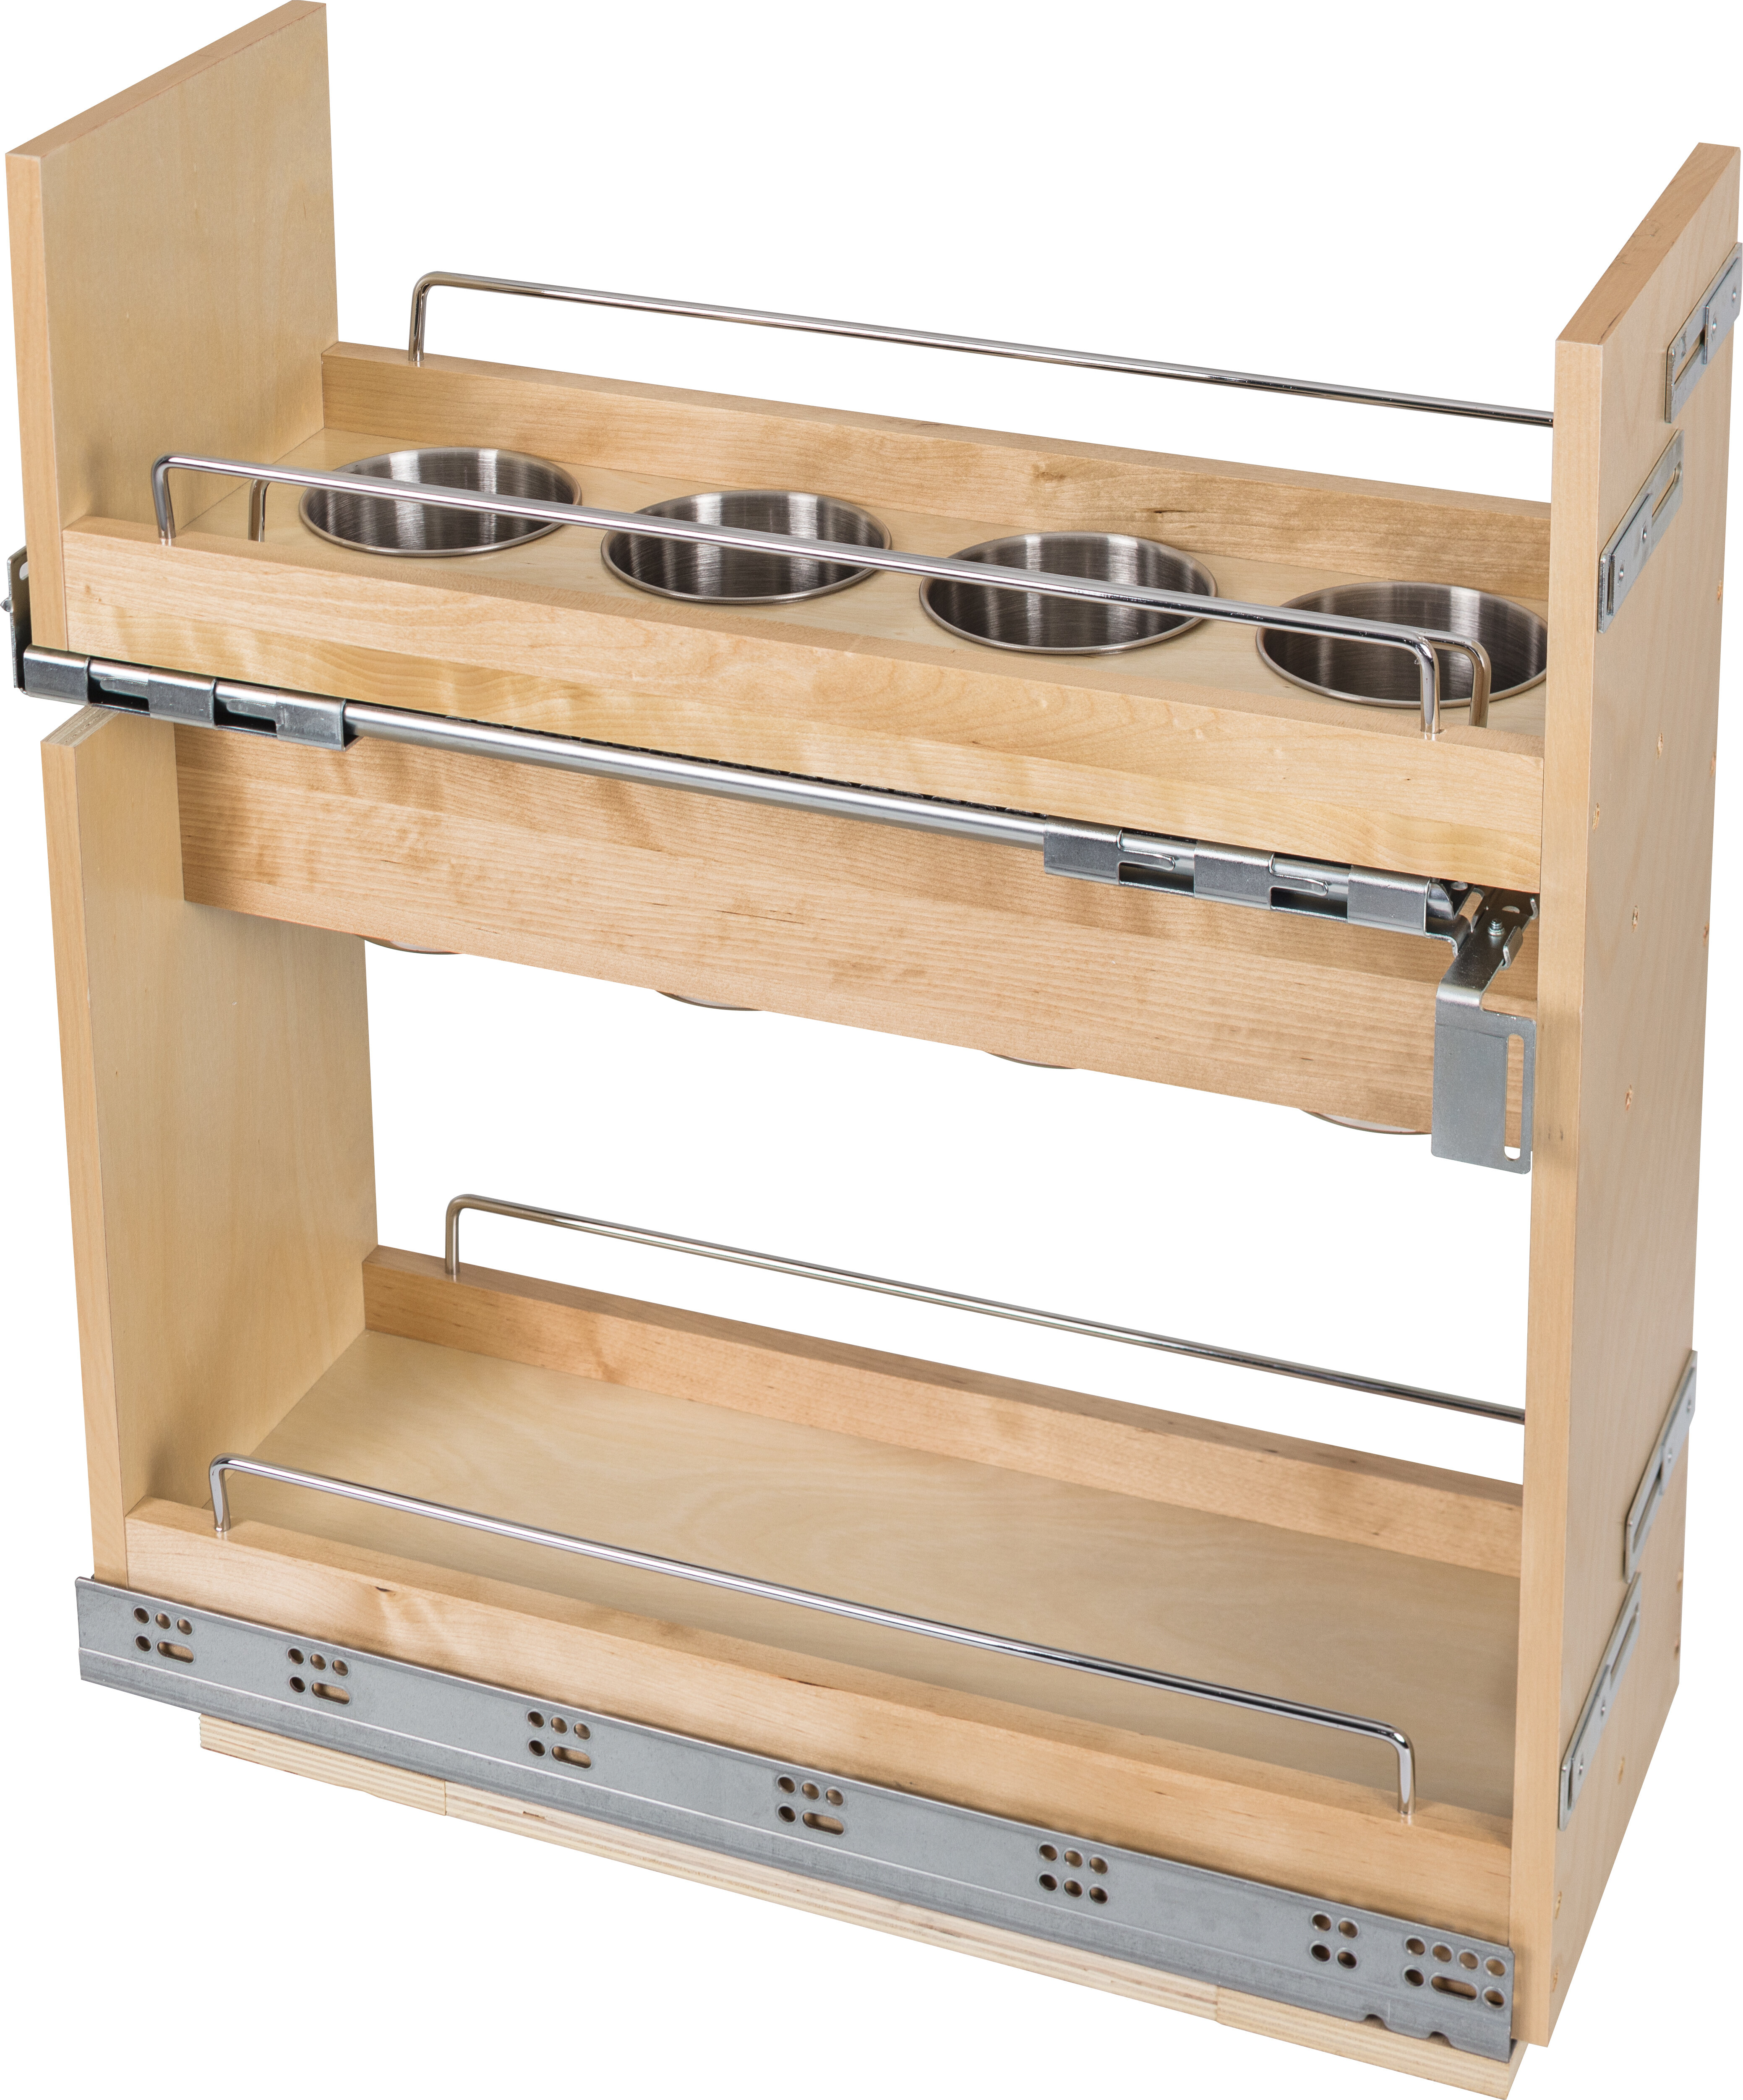 Base Pantry Pull-out Utensil Storage - Cardell Cabinetry